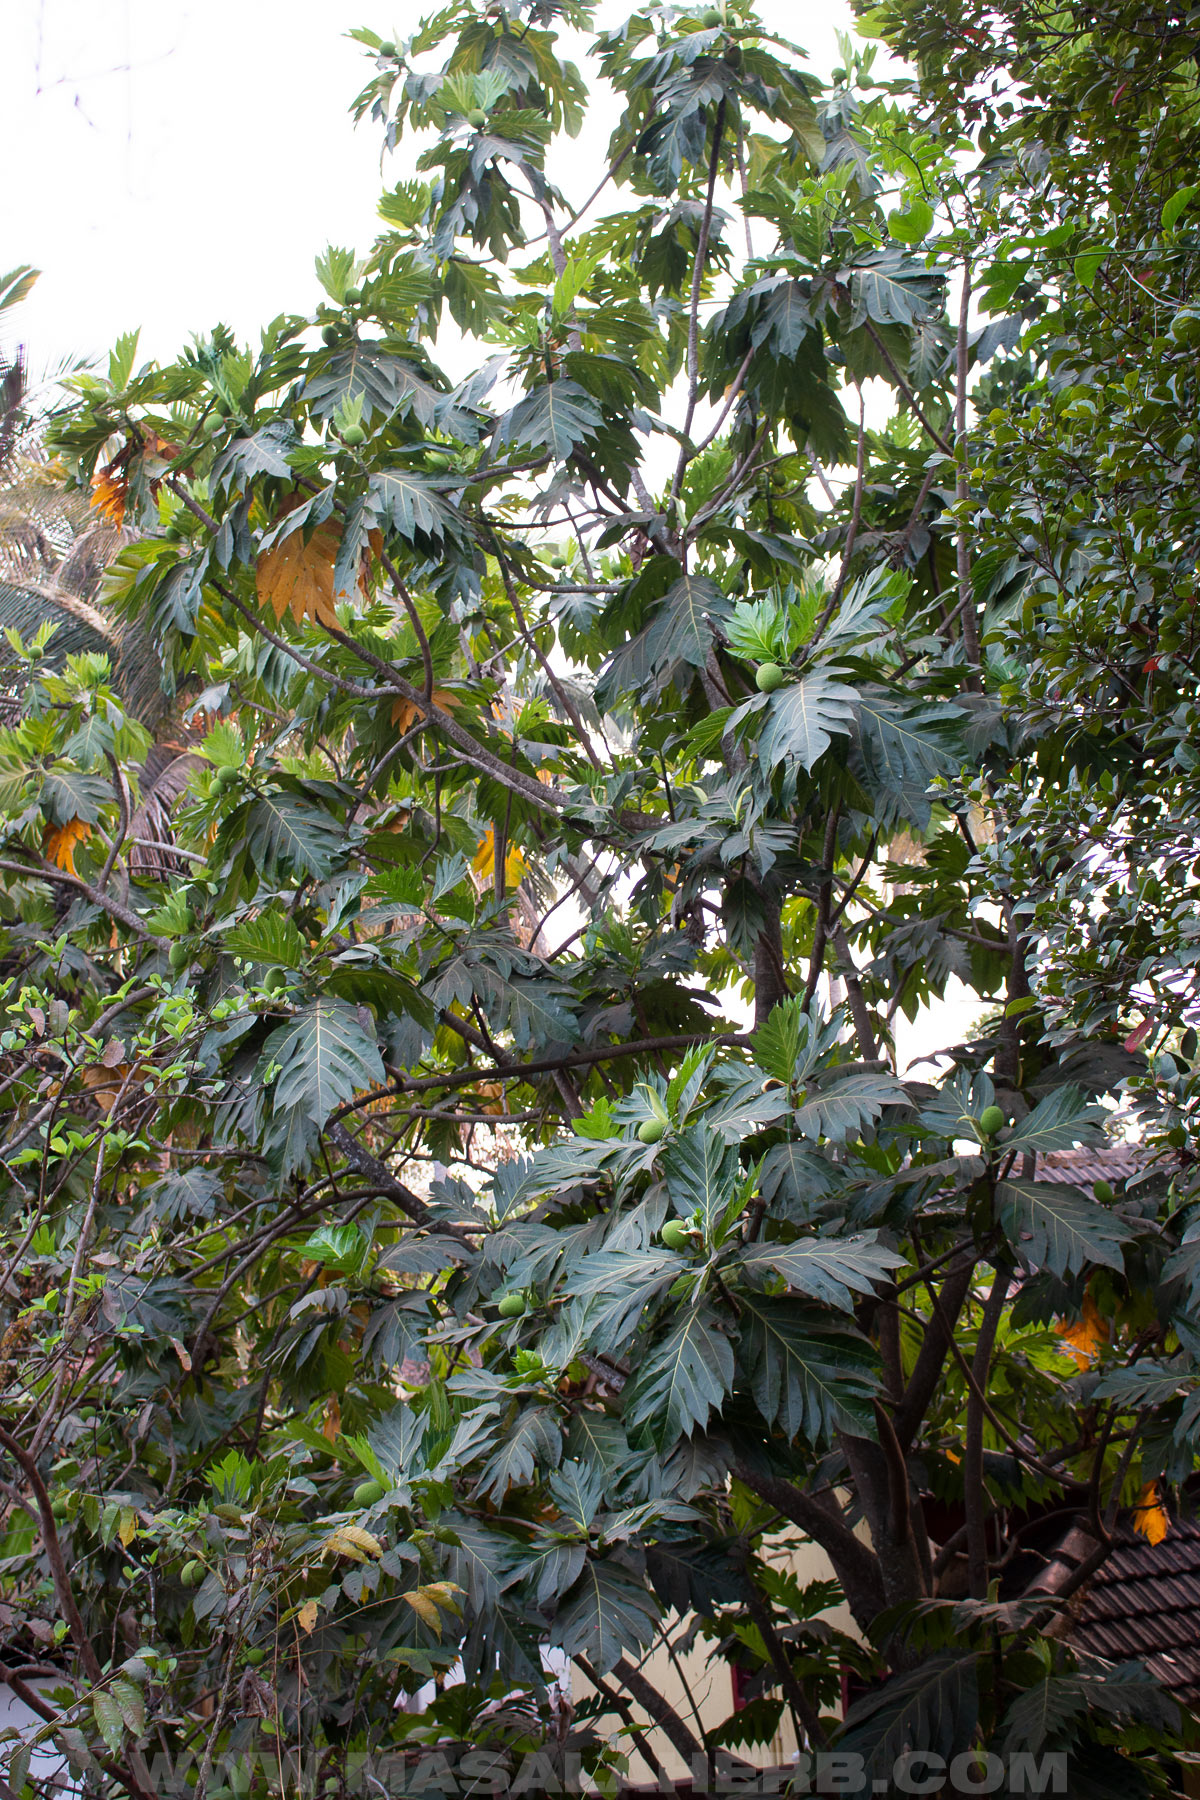 Breadfruit tree with small breadfruits growing